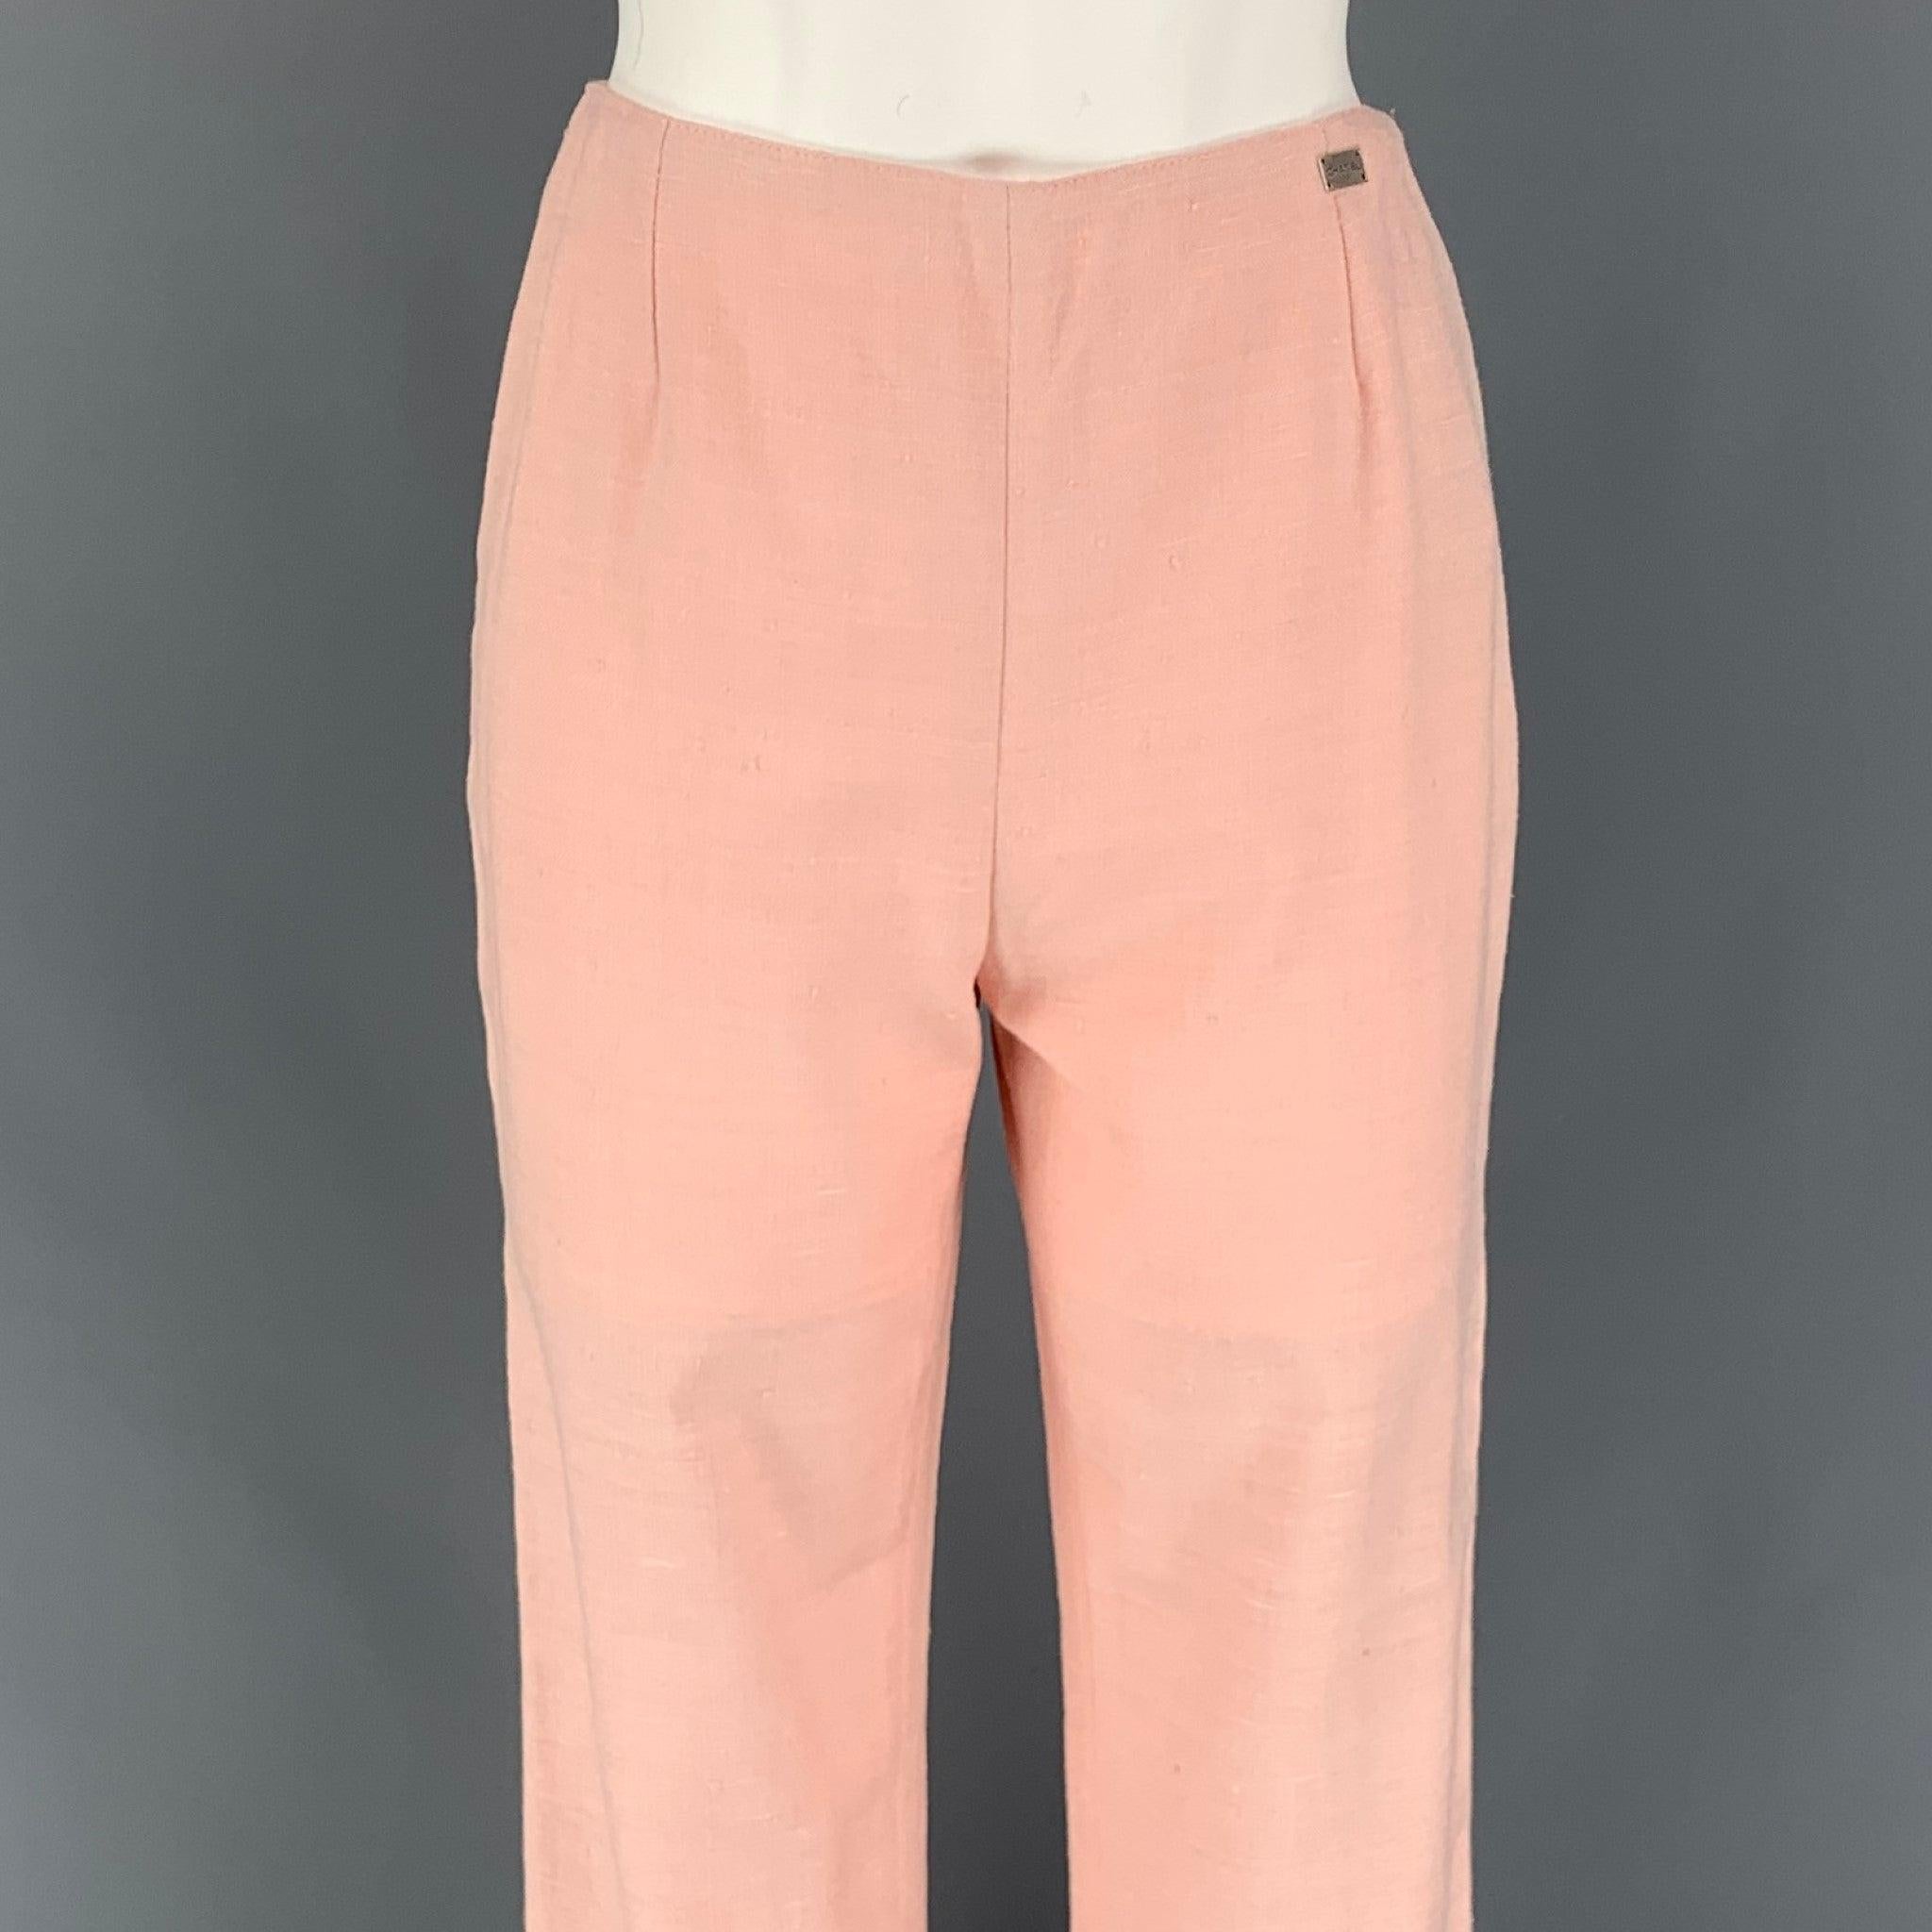 CHANEL casual pants comes in a rose silk featuring a high waist, pleated, logo detail, and a side zipper closure. Made in France.
Very Good
Pre-Owned Condition. 

Marked:   36 

Measurements: 
  Waist: 26 inches  Rise:
10.5 inches  Inseam: 28 inches